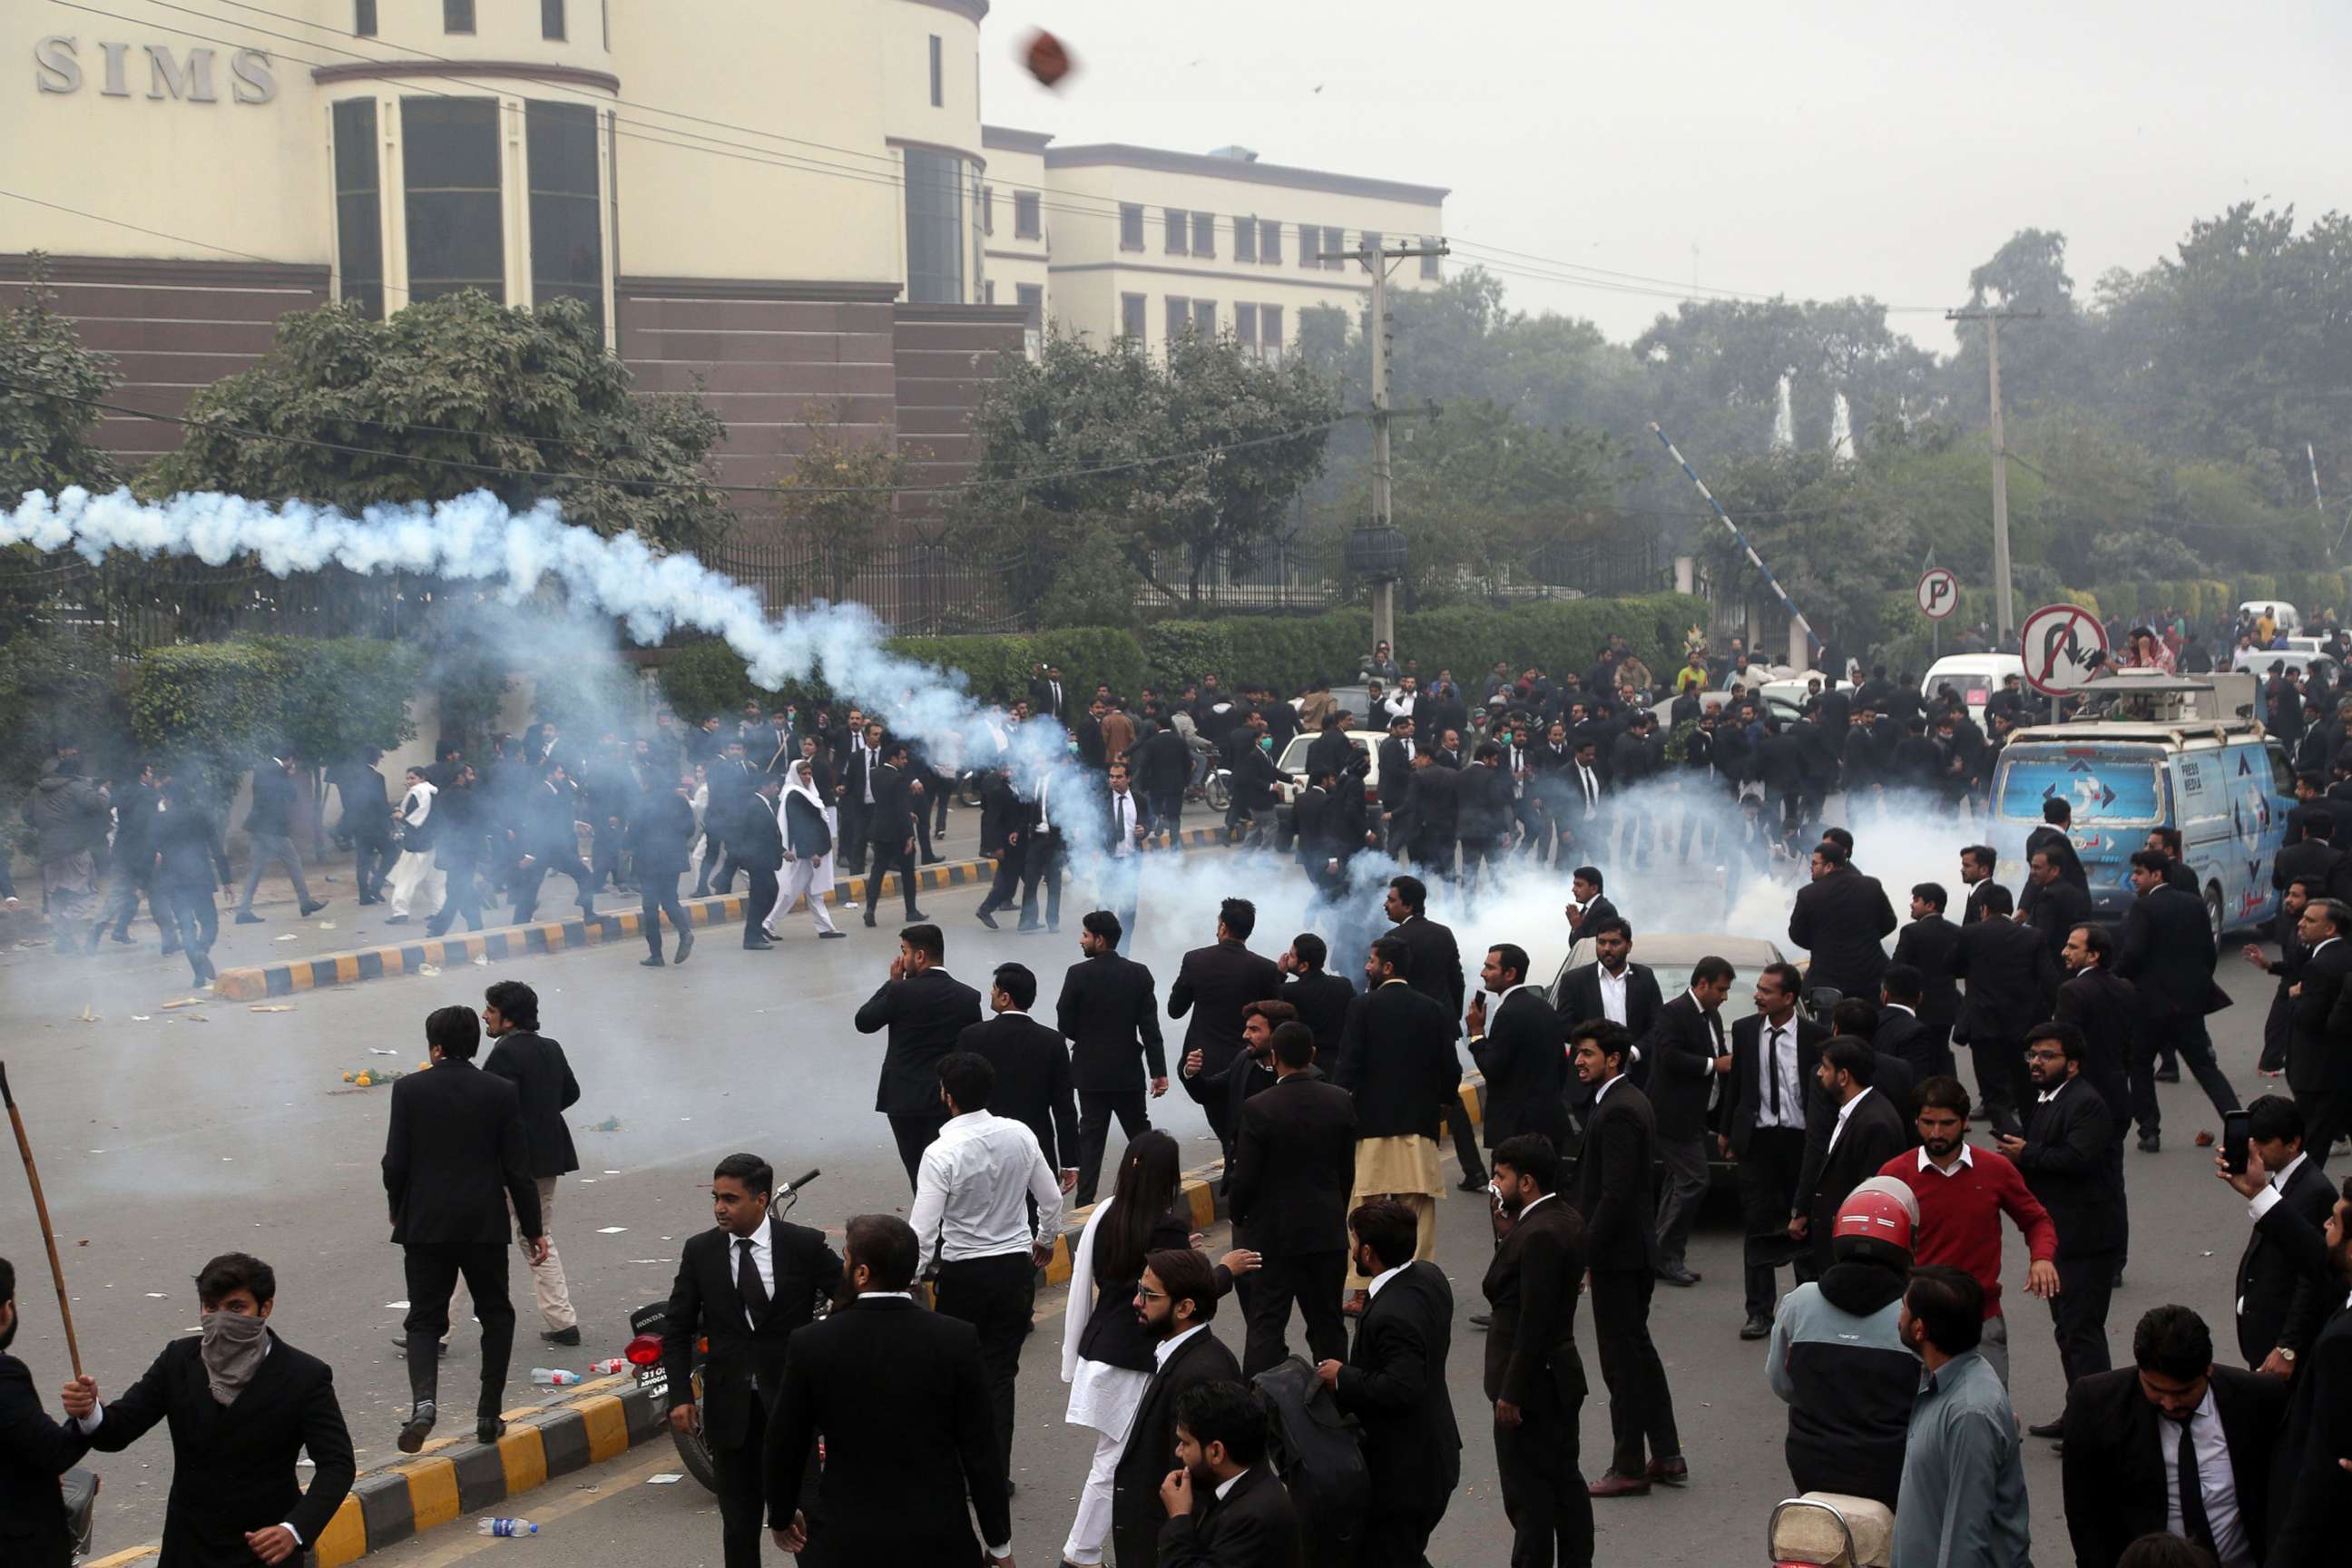 PHOTO: Policemen fire tear gas shells during clashes between lawyers and doctors outside the Punjab Institute of Cardiology, in Lahore, Pakistan, Dec. 11, 2019.